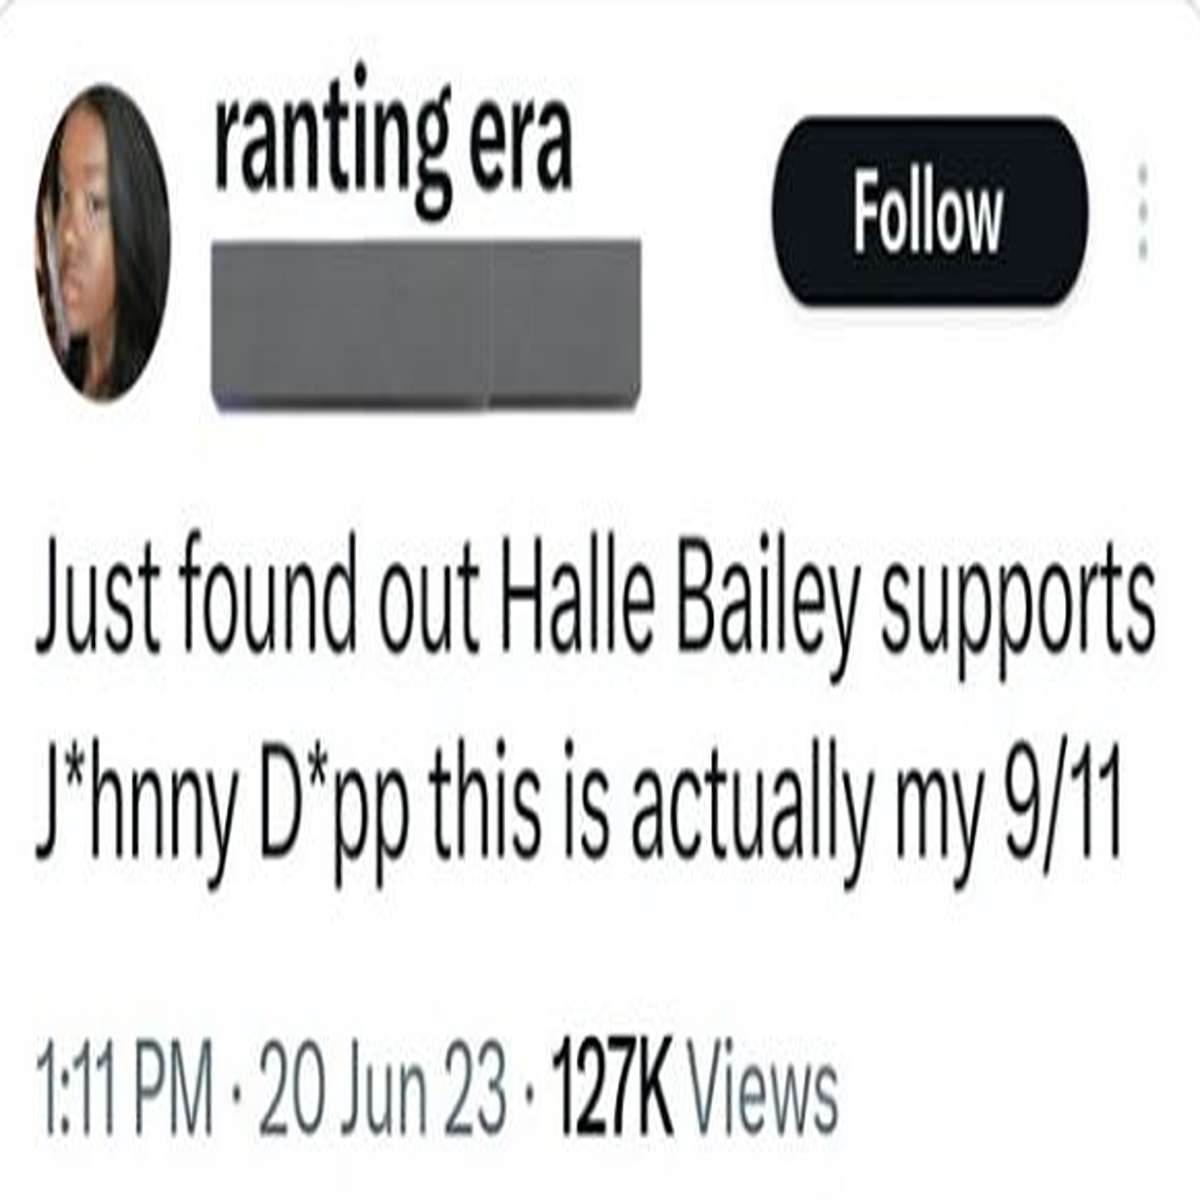 delusional people - zákaz prodeje alkoholických nápojů - ranting era 2345 Just found out Halle Bailey supplies J'hnny D'pp this is actually my S 20 Jun Views